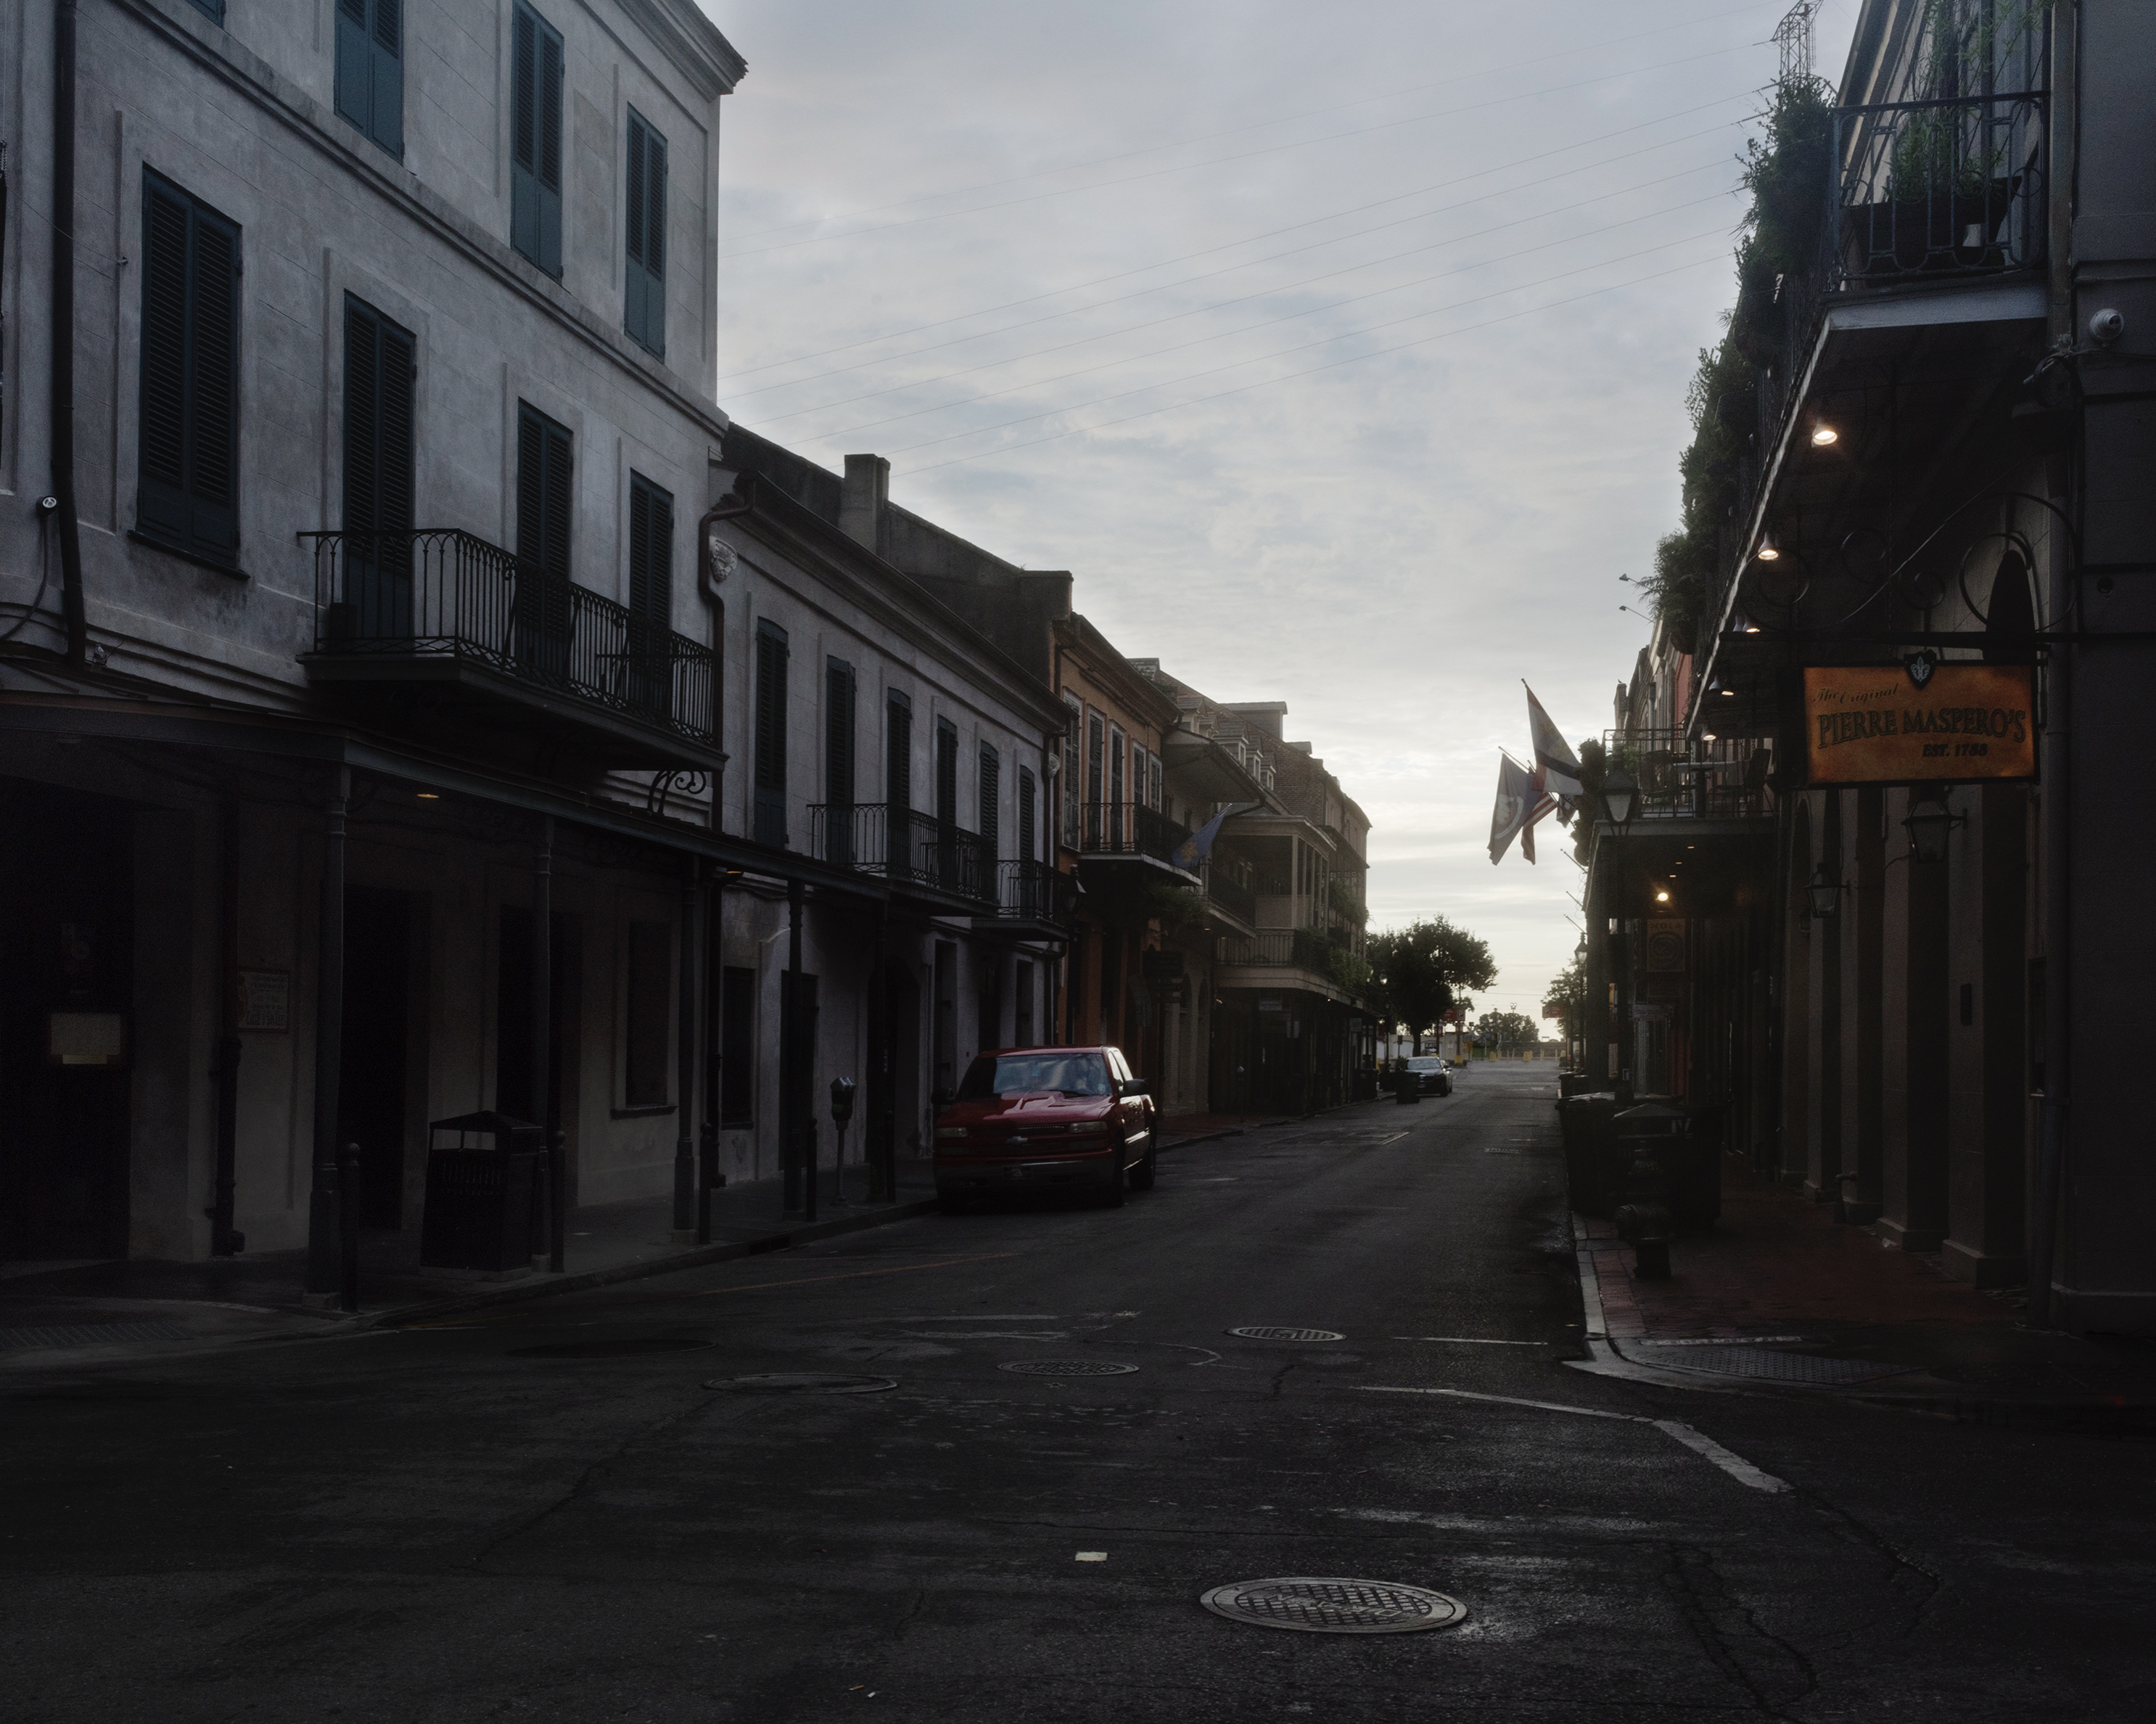 St. Louis street, looking towards the Mississippi River in New Orleans, LA for They Sold Humans Beings Here (the 1619 Project).